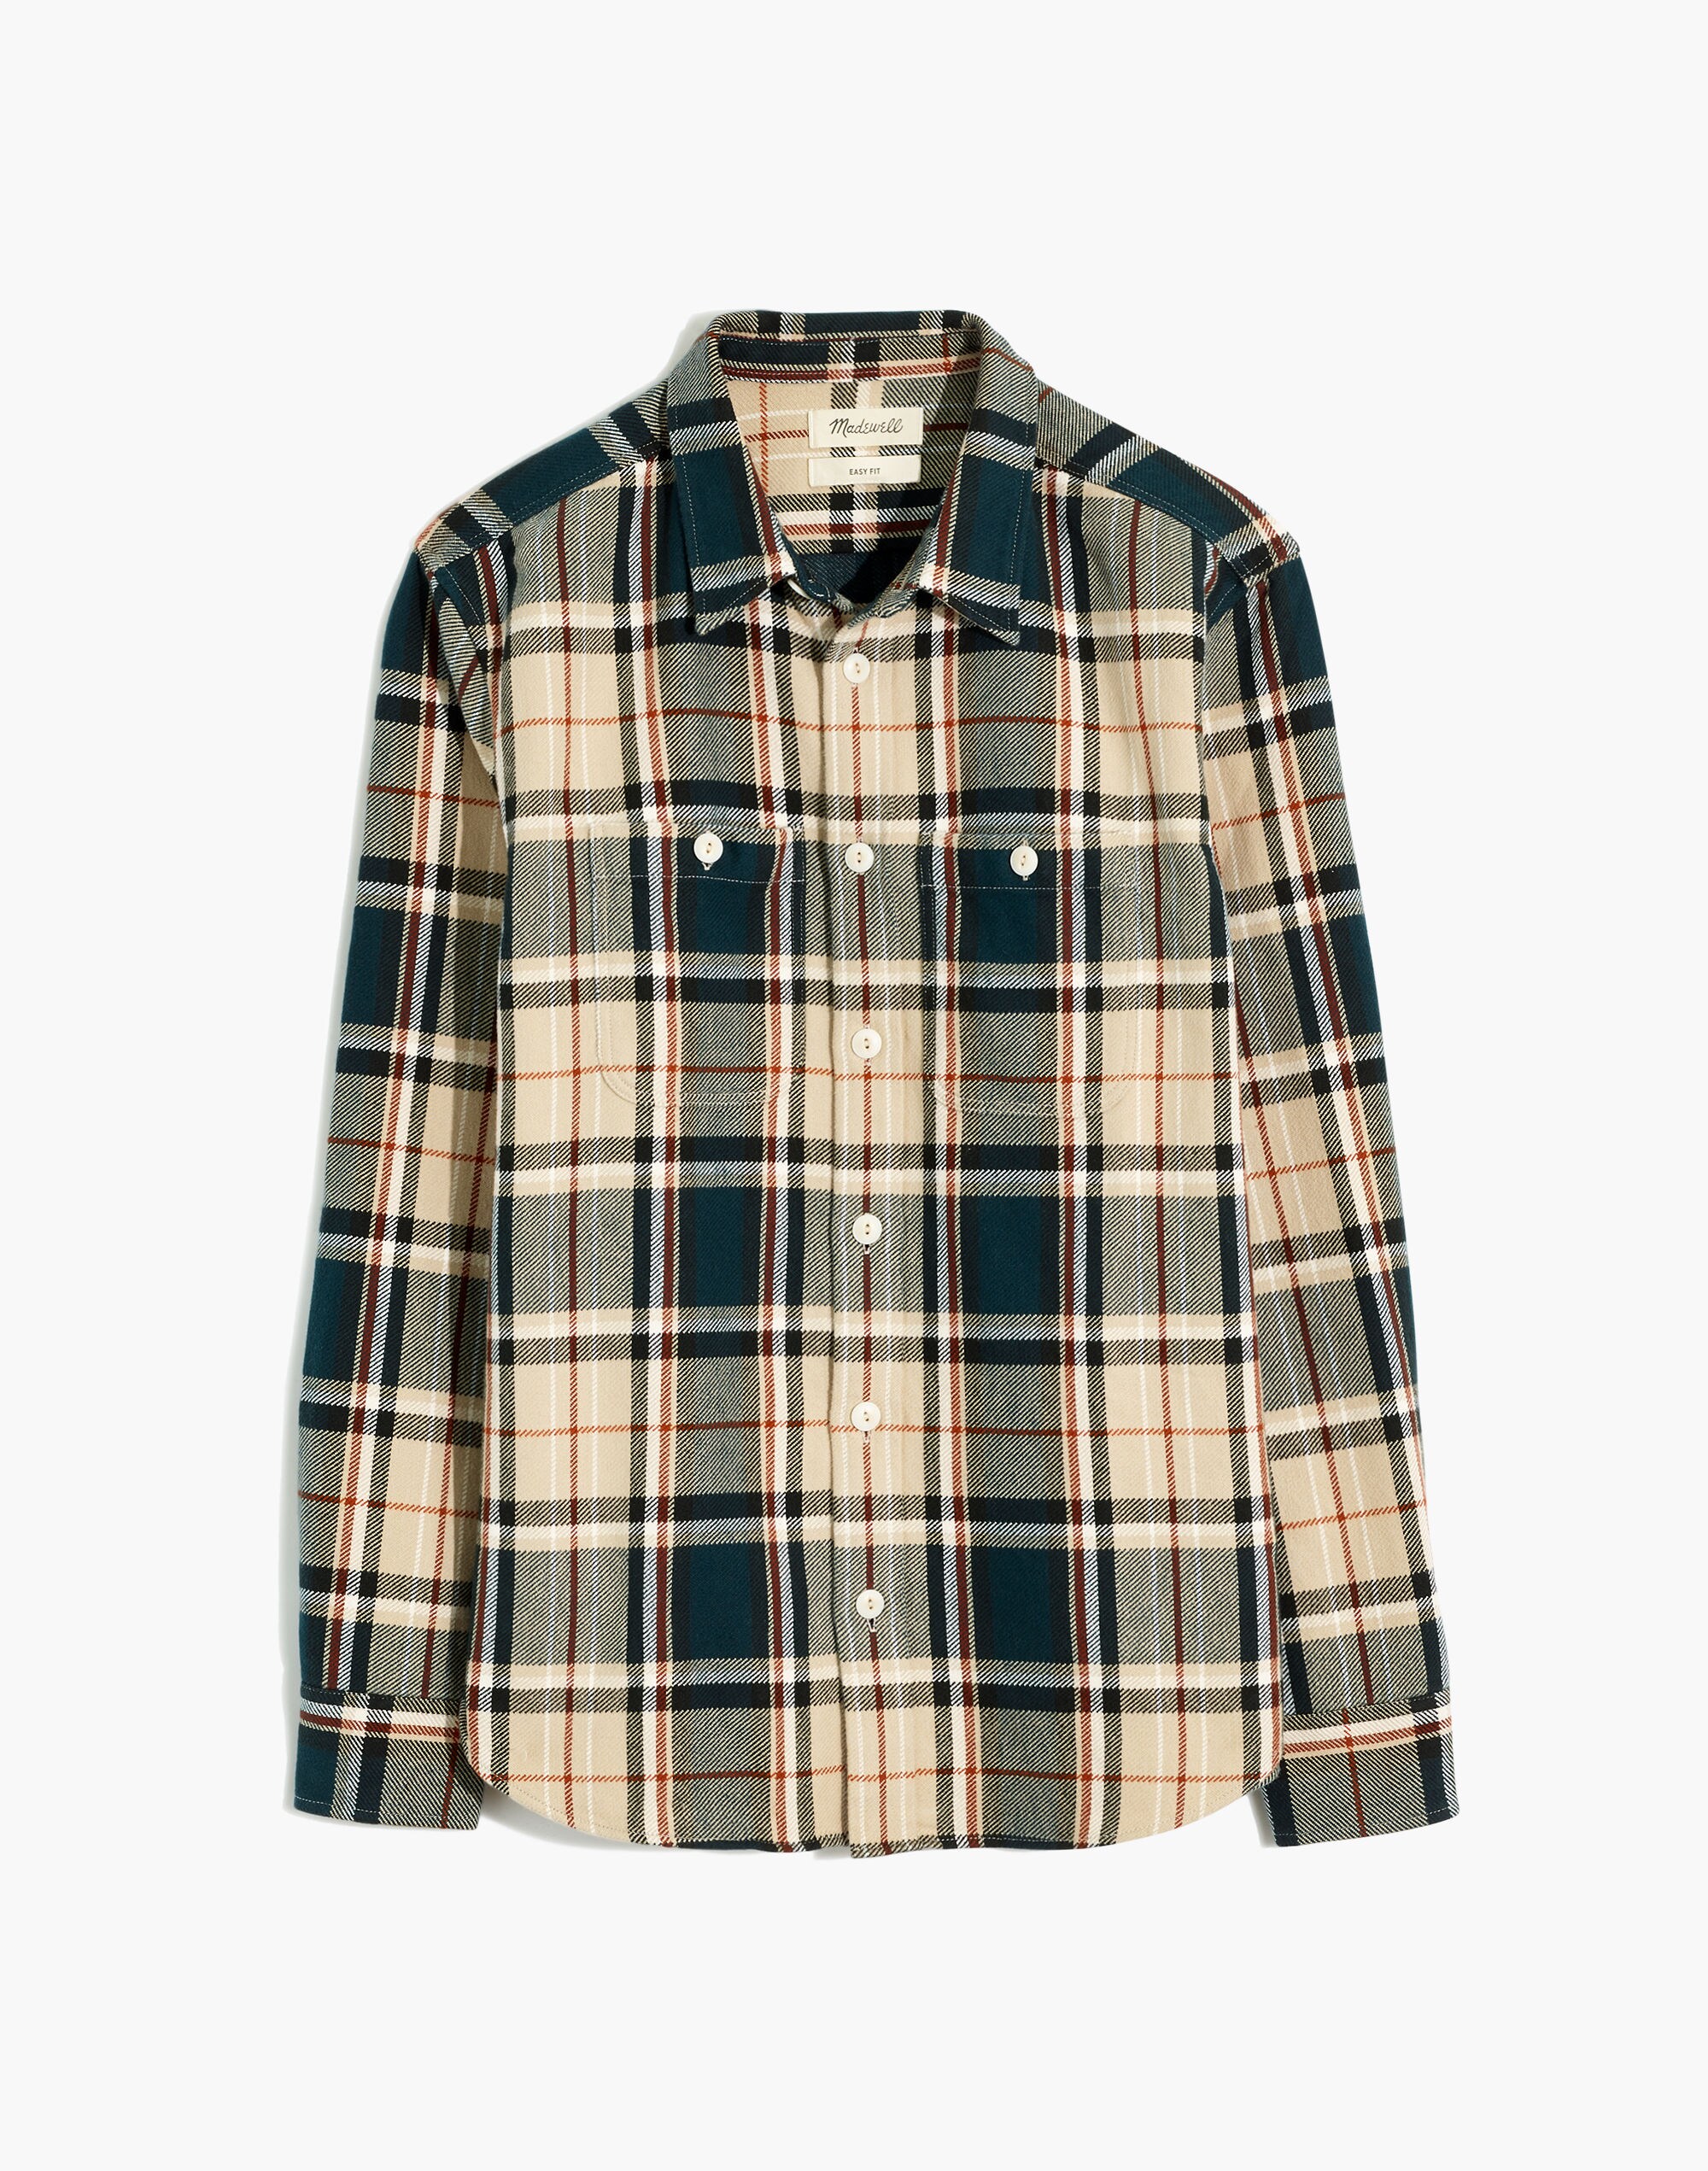 Twill Easy Long-Sleeve Shirt in Peterson Plaid